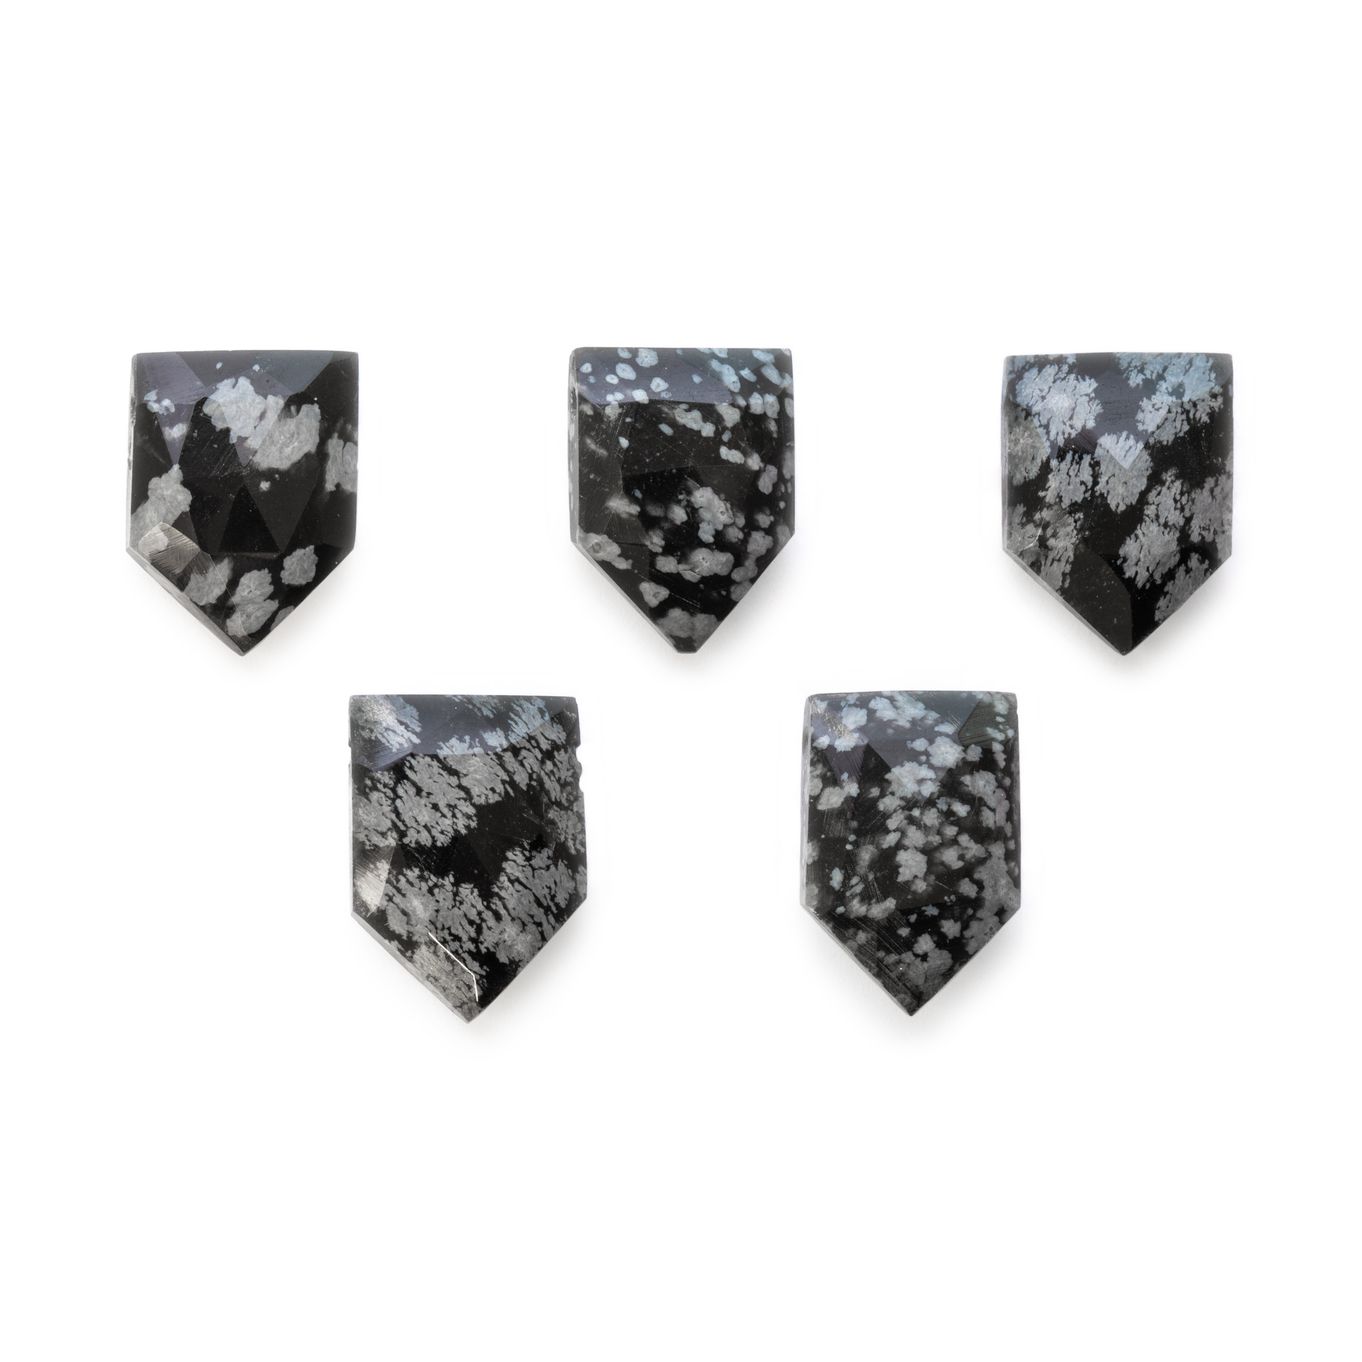 Snowflake Obsidian Faceted Shield Shaped Beads - Approx from 9mm